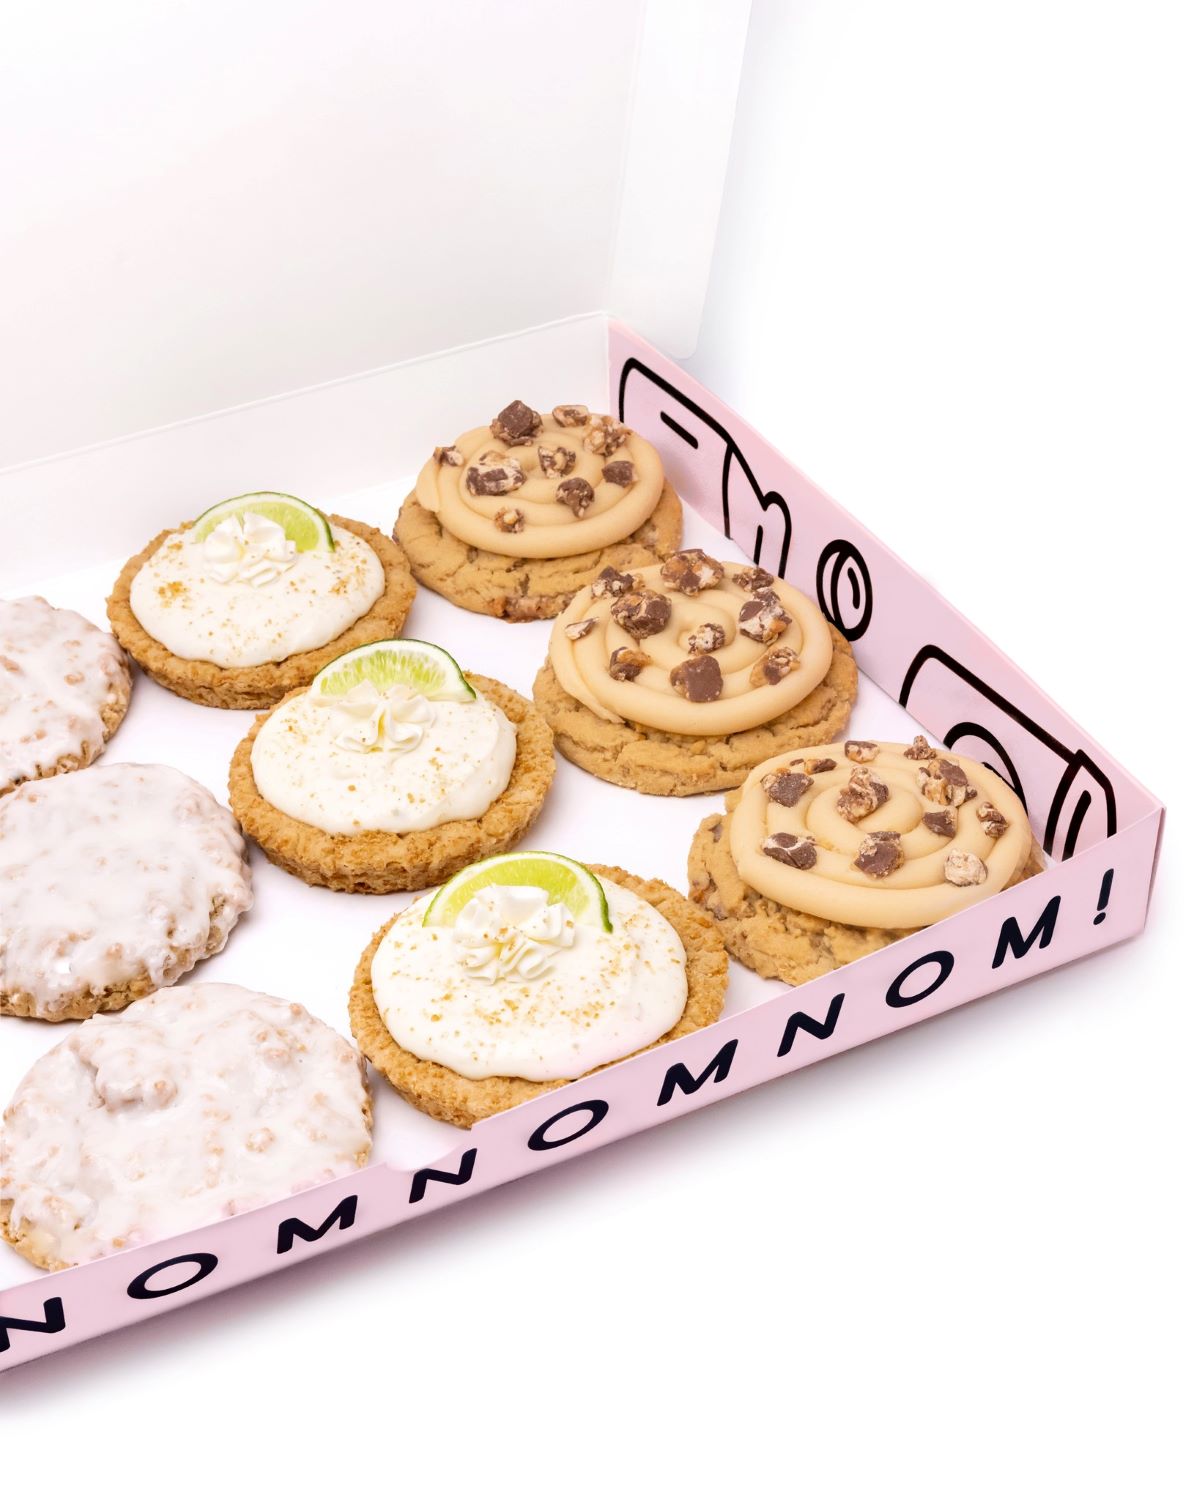 Crumbl Cookies May Be Rolling into Milpitas